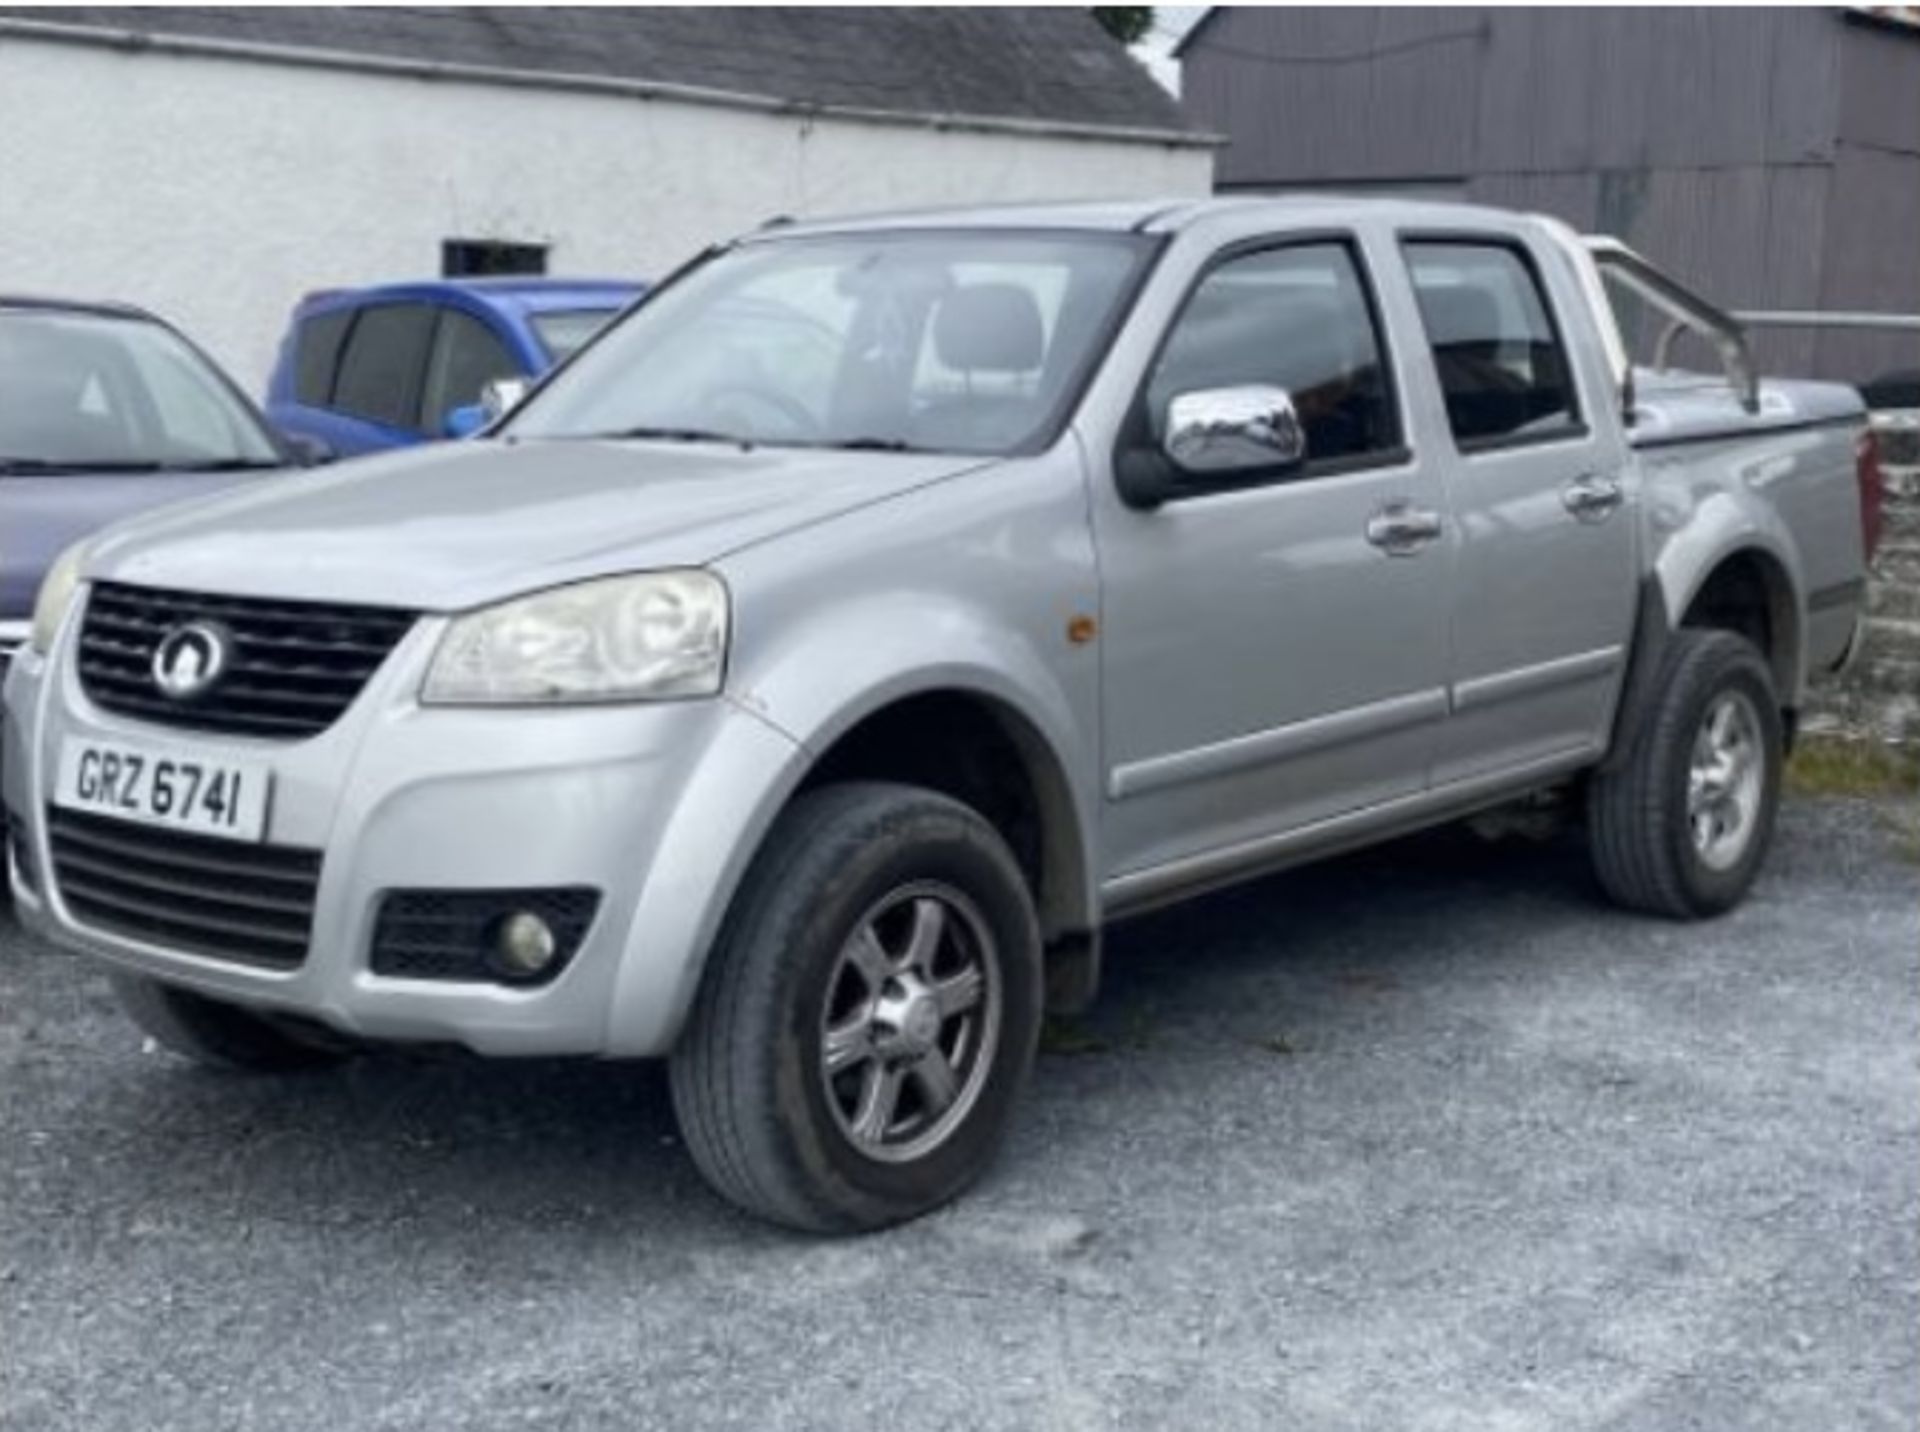 2013 GREAT WALL STEED 2.0 TD 4X4 PICK UP LOCATION N IRELAND - Image 7 of 7